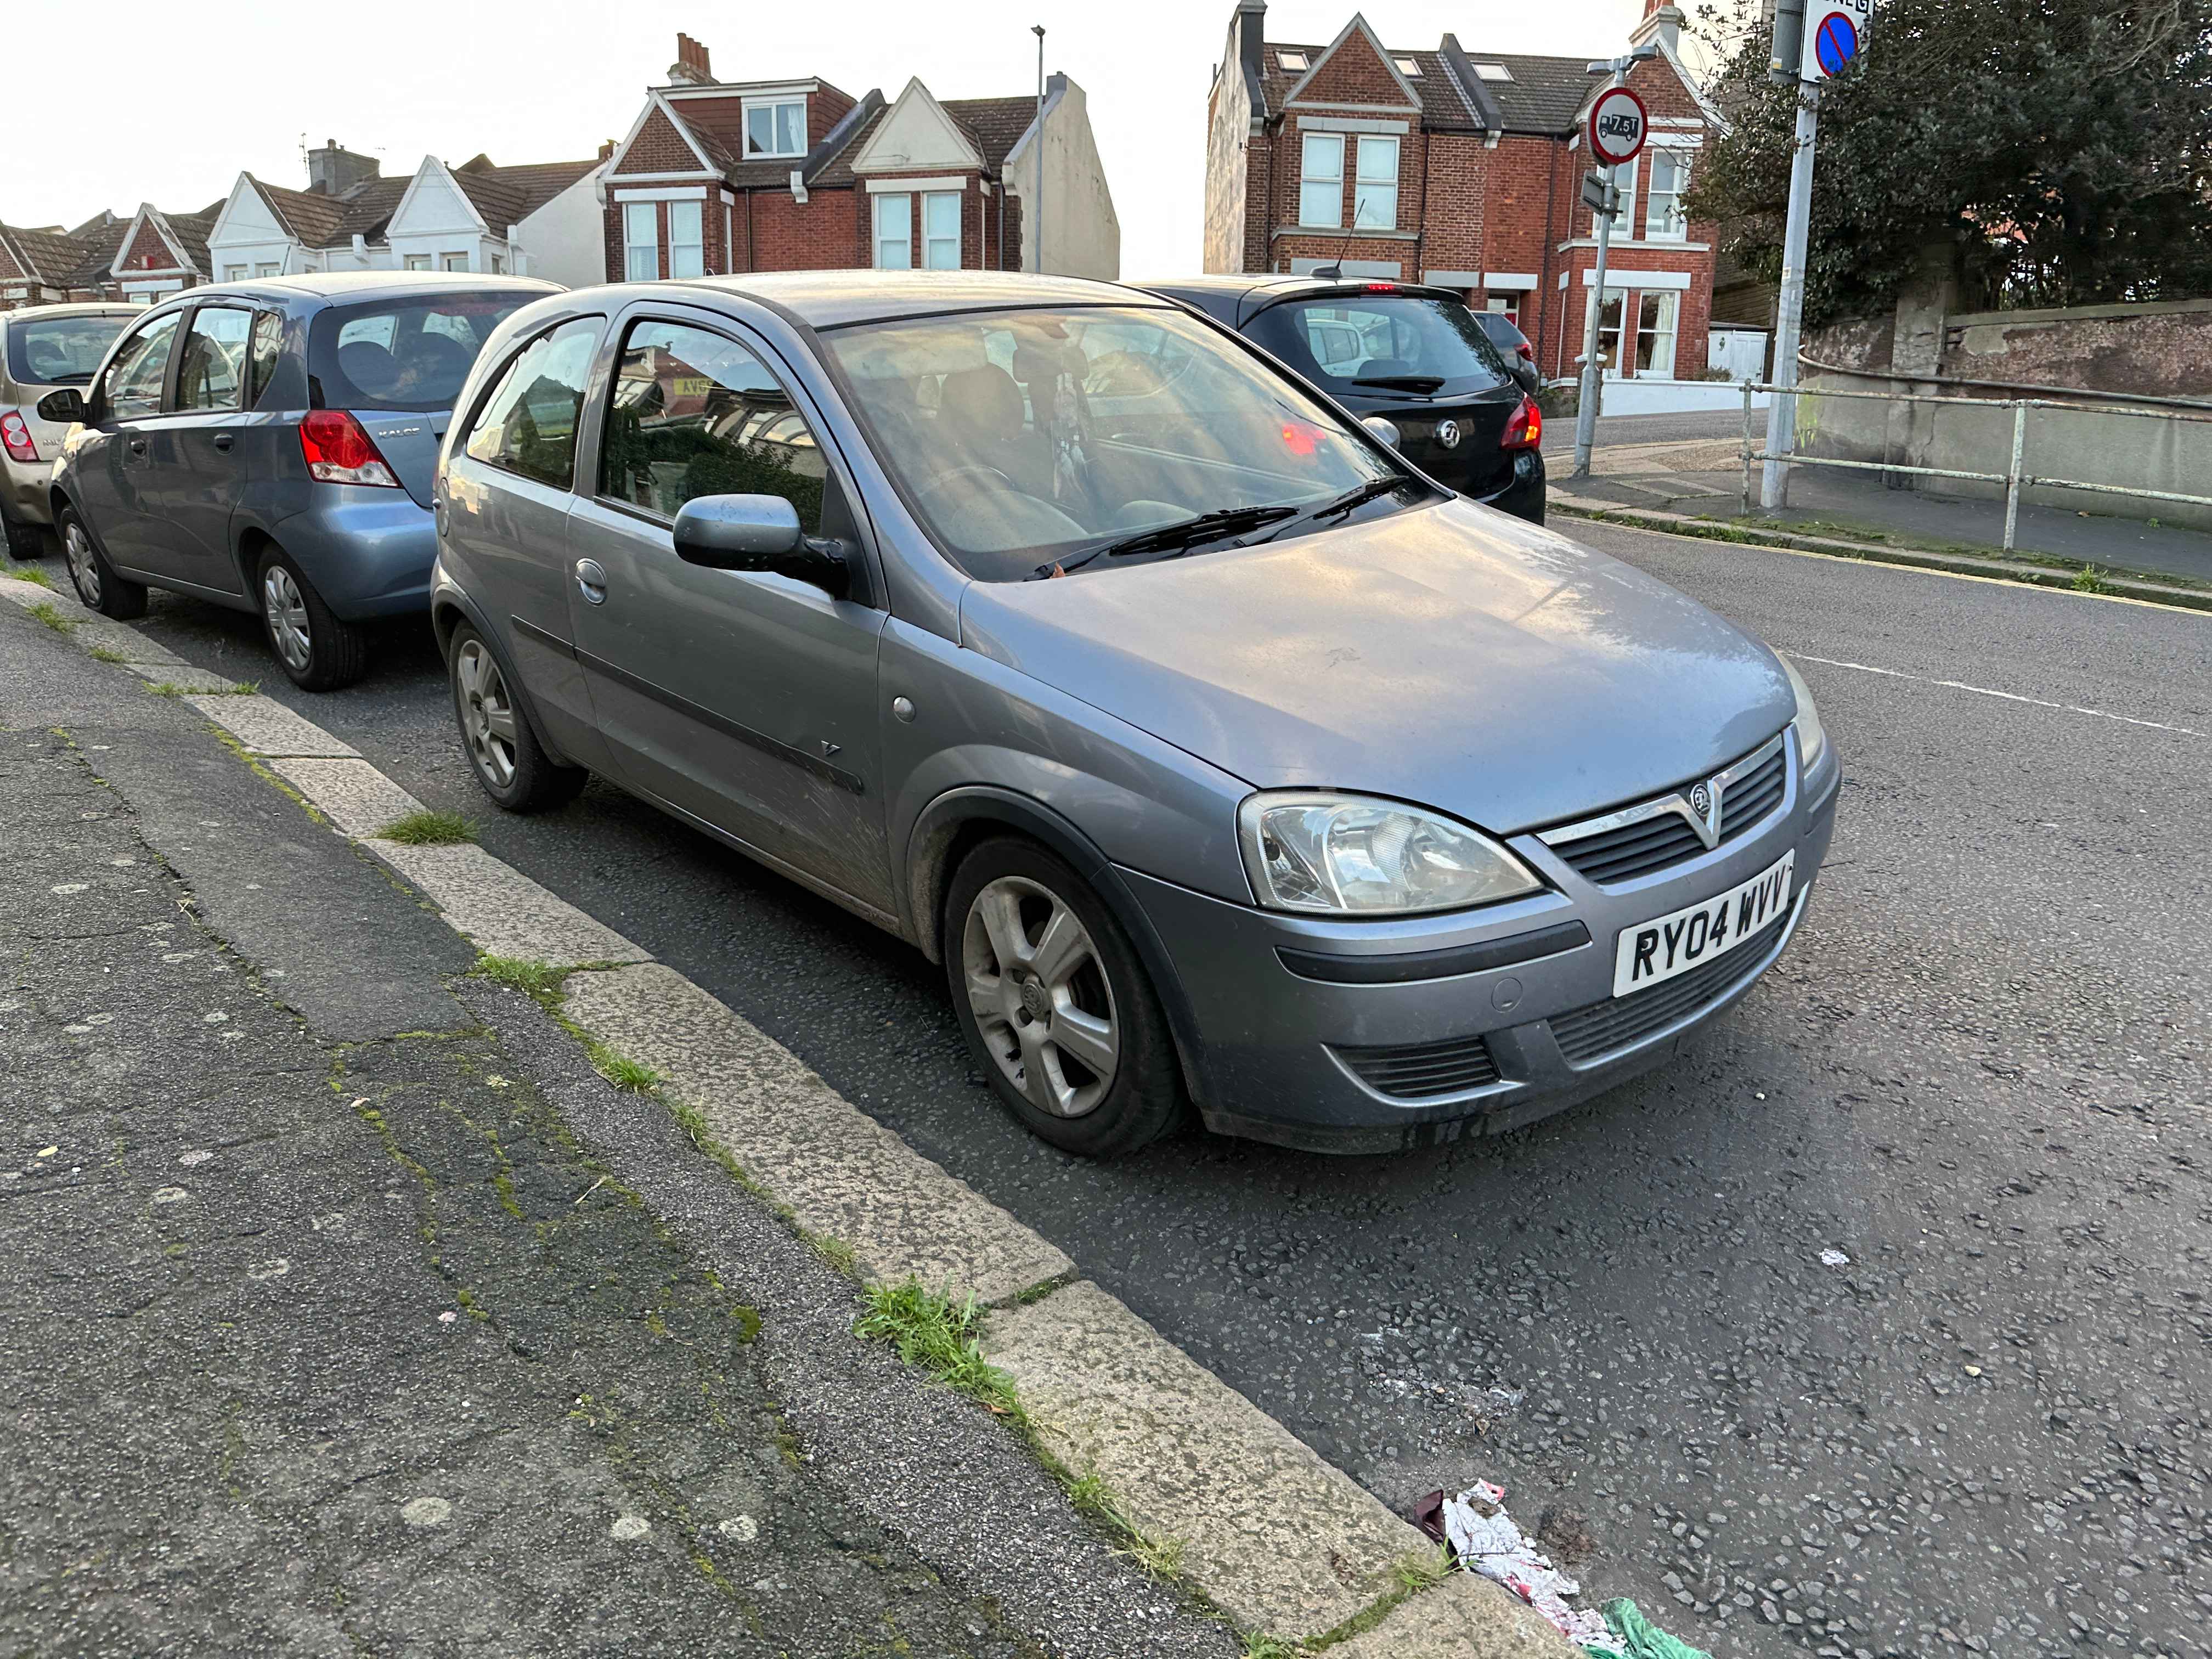 Photograph of RY04 WVV - a Silver Vauxhall Corsa parked in Hollingdean by a non-resident. 